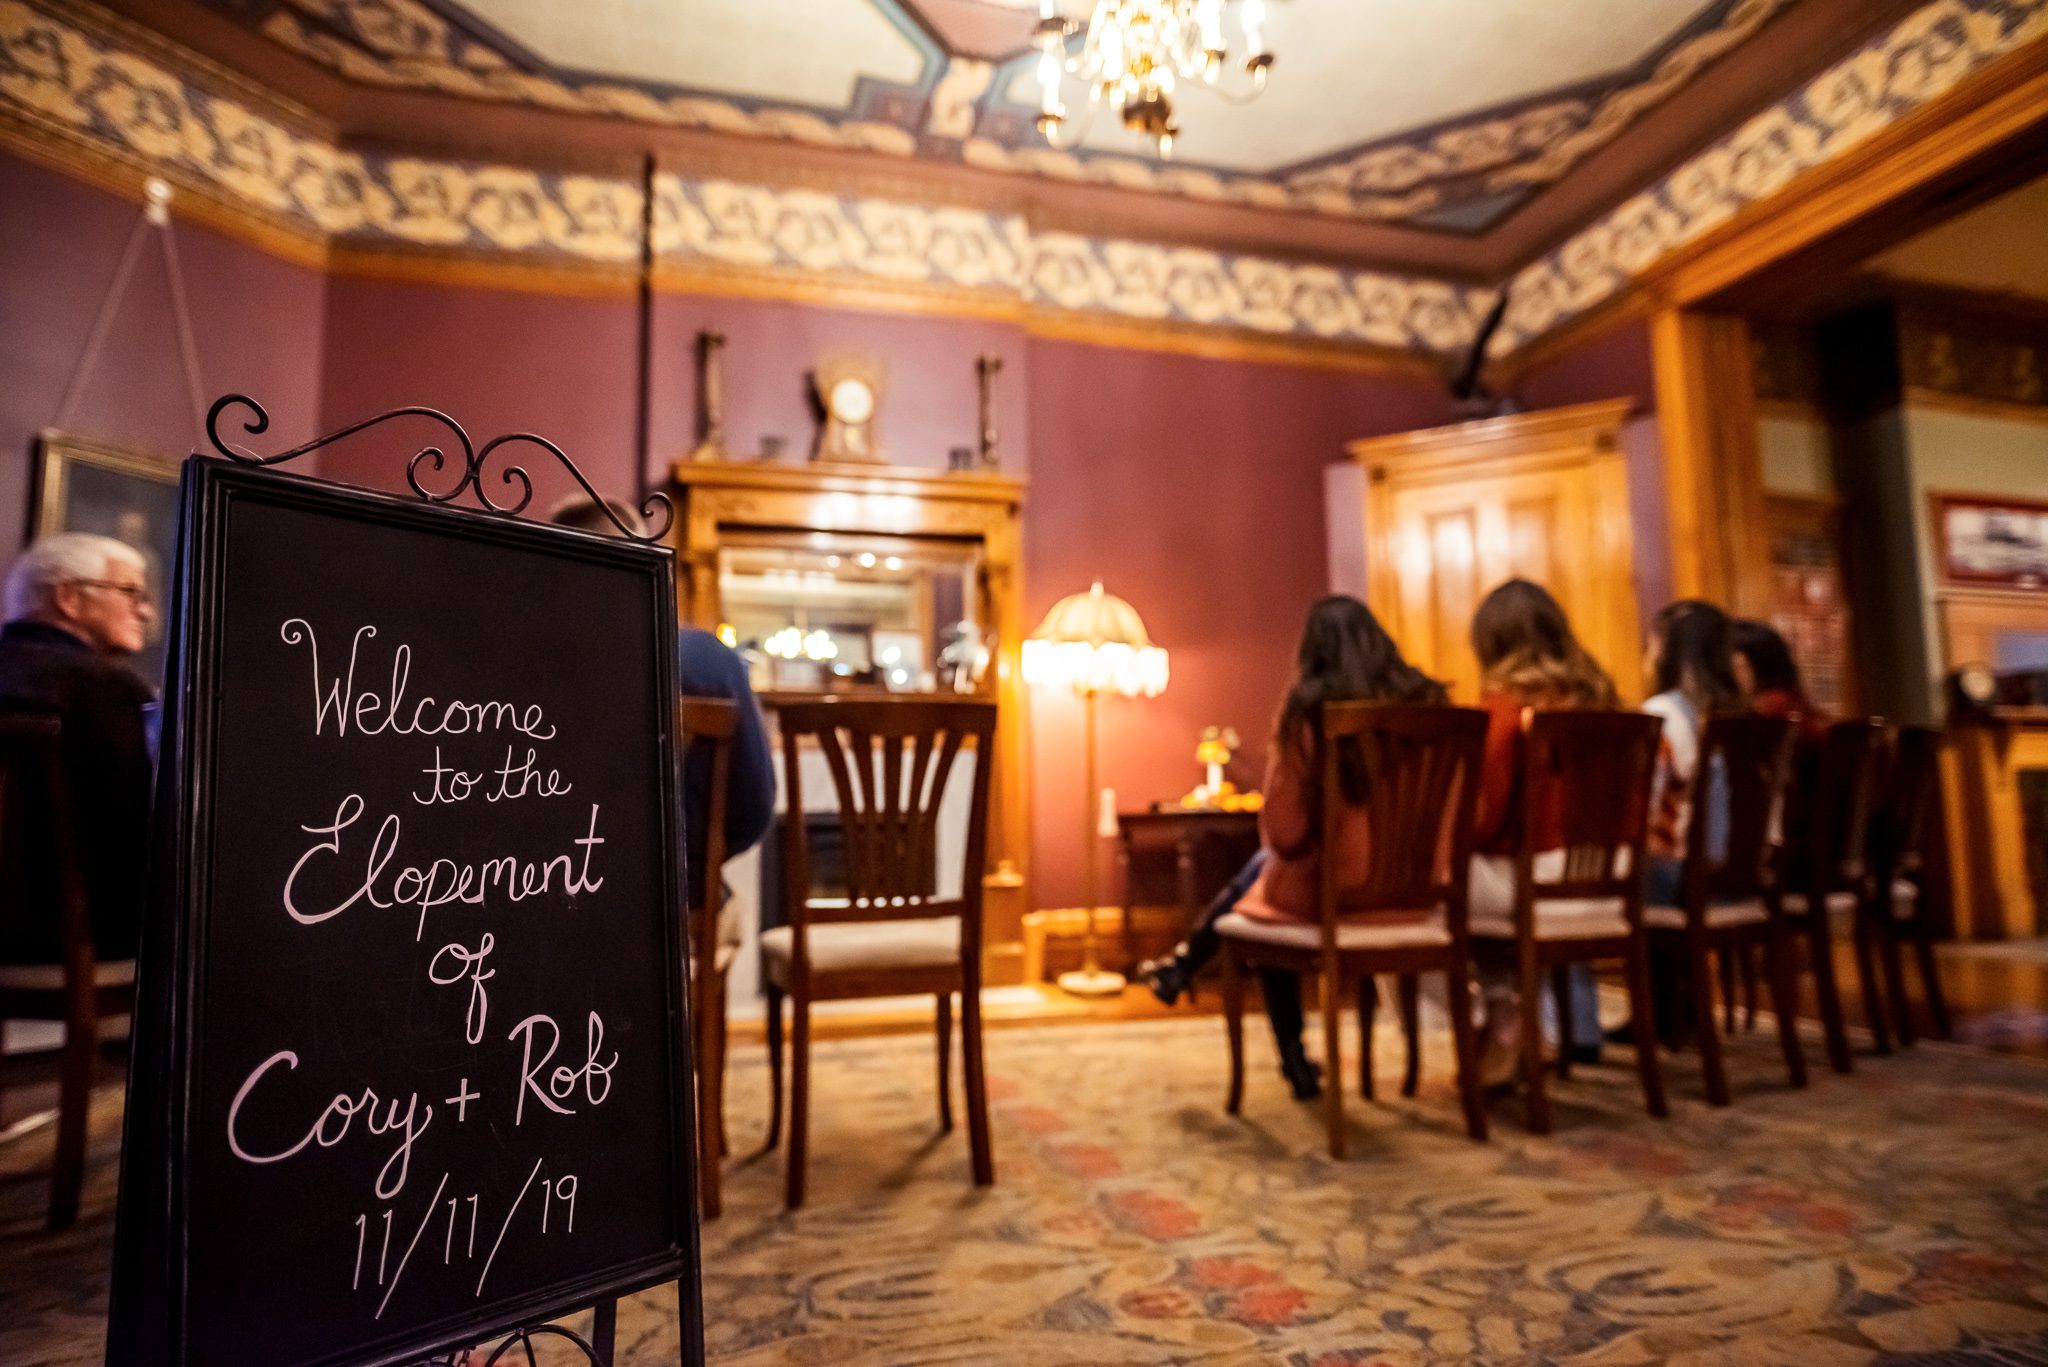 The Lumber Baron Inn always does a great job of making their guests feel welcomed and special. For Cory & Rob's wedding they put a chalk board sign out welcoming guests.